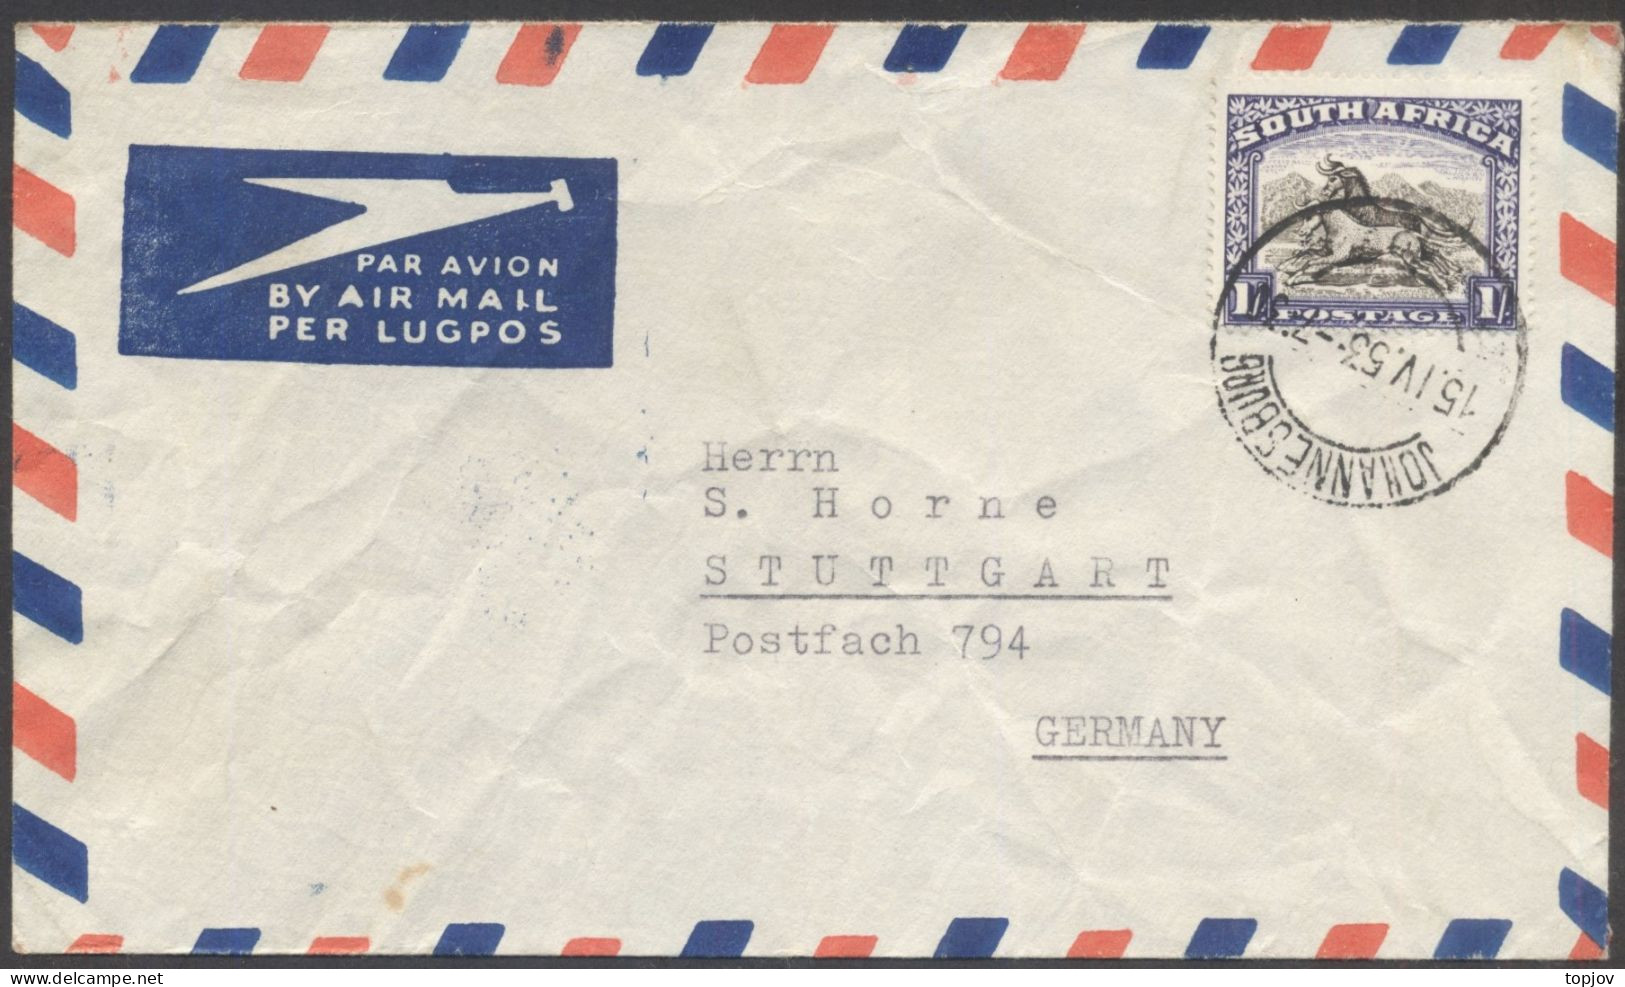 SOUTH AFRICA  RSA - JOHANNESBURG To GERMANY AIRMAIL - ANIMALS - 1953 - Poste Aérienne